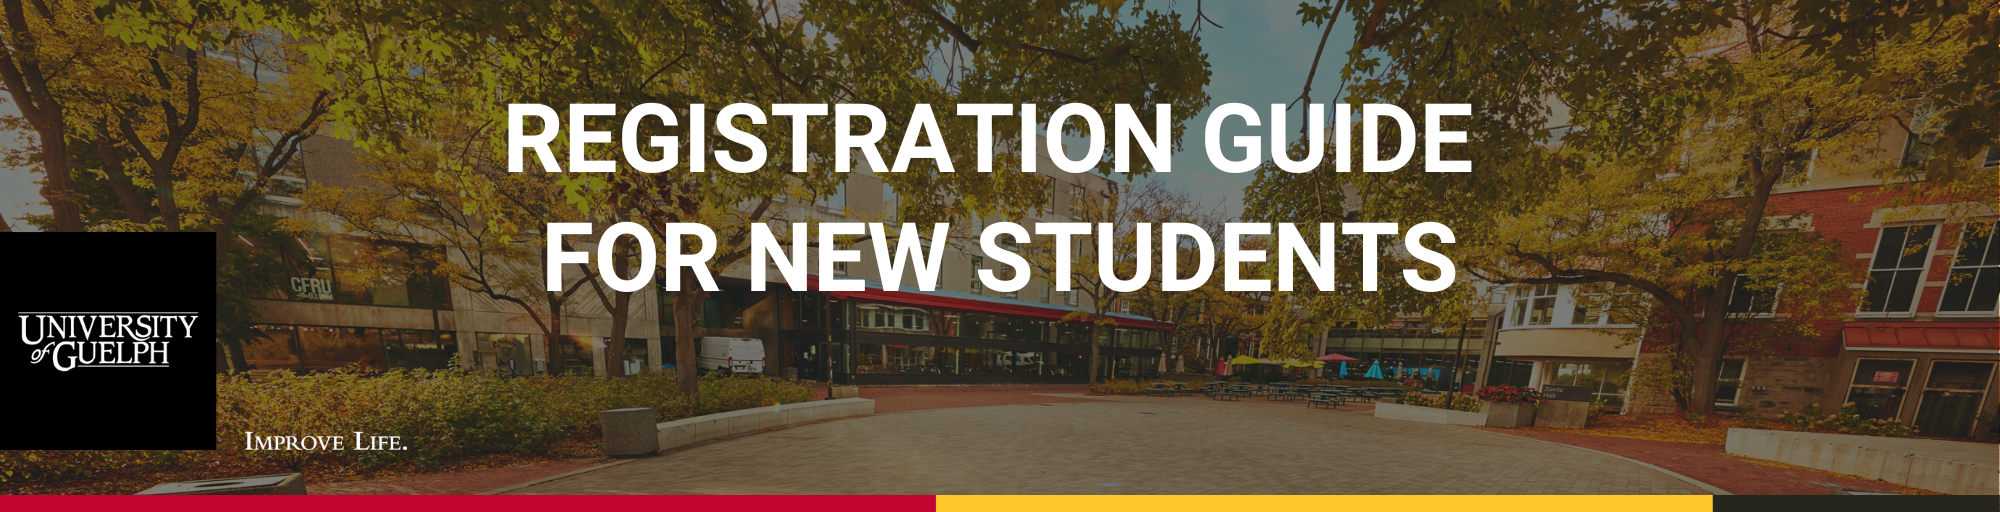 The Registration Guide for New Students in text on top of photo of the courtyard outside the University Centre building in the fall